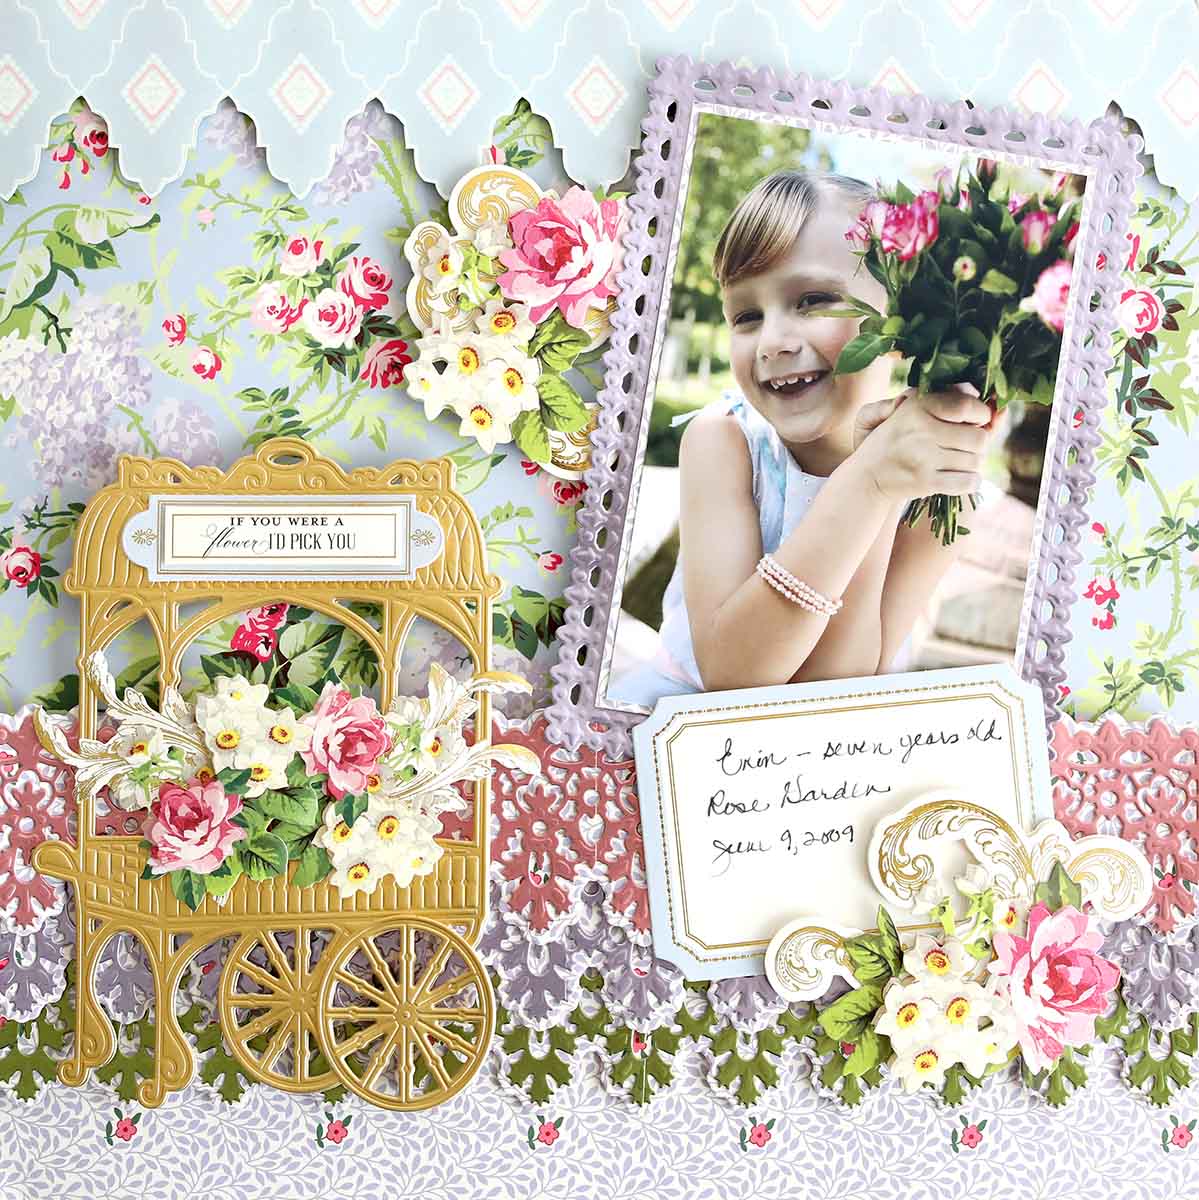 A scrapbook page from the Annalise 12x12 Cardstock and Embellishments collection, featuring a picture of a girl alongside a carriage, adorned with beautiful embellishments and papers.